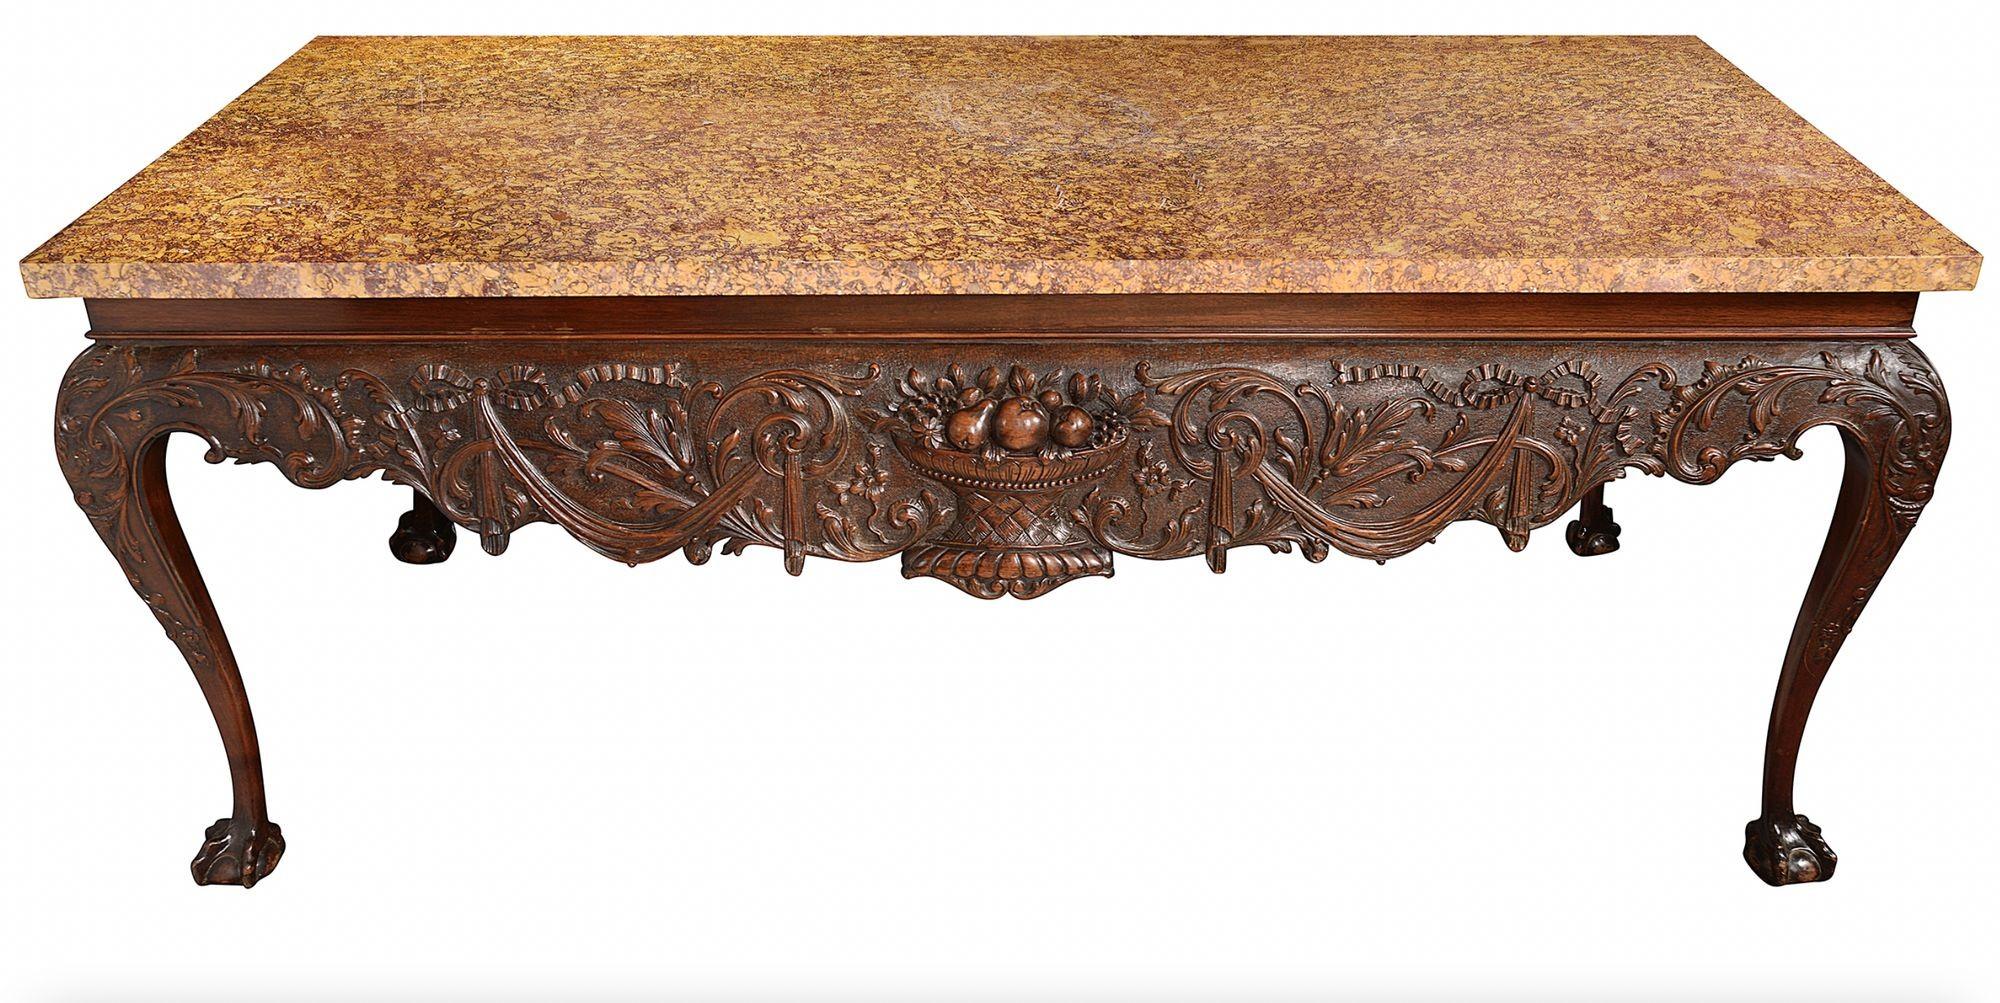 A very impressive late 19th century Irish influenced marble topped console/side table, having its original Brocatelle Jaune du jura marble top, wonderful hand carved classical foliate, ribbon and swag decoration to all four sides of the apron.